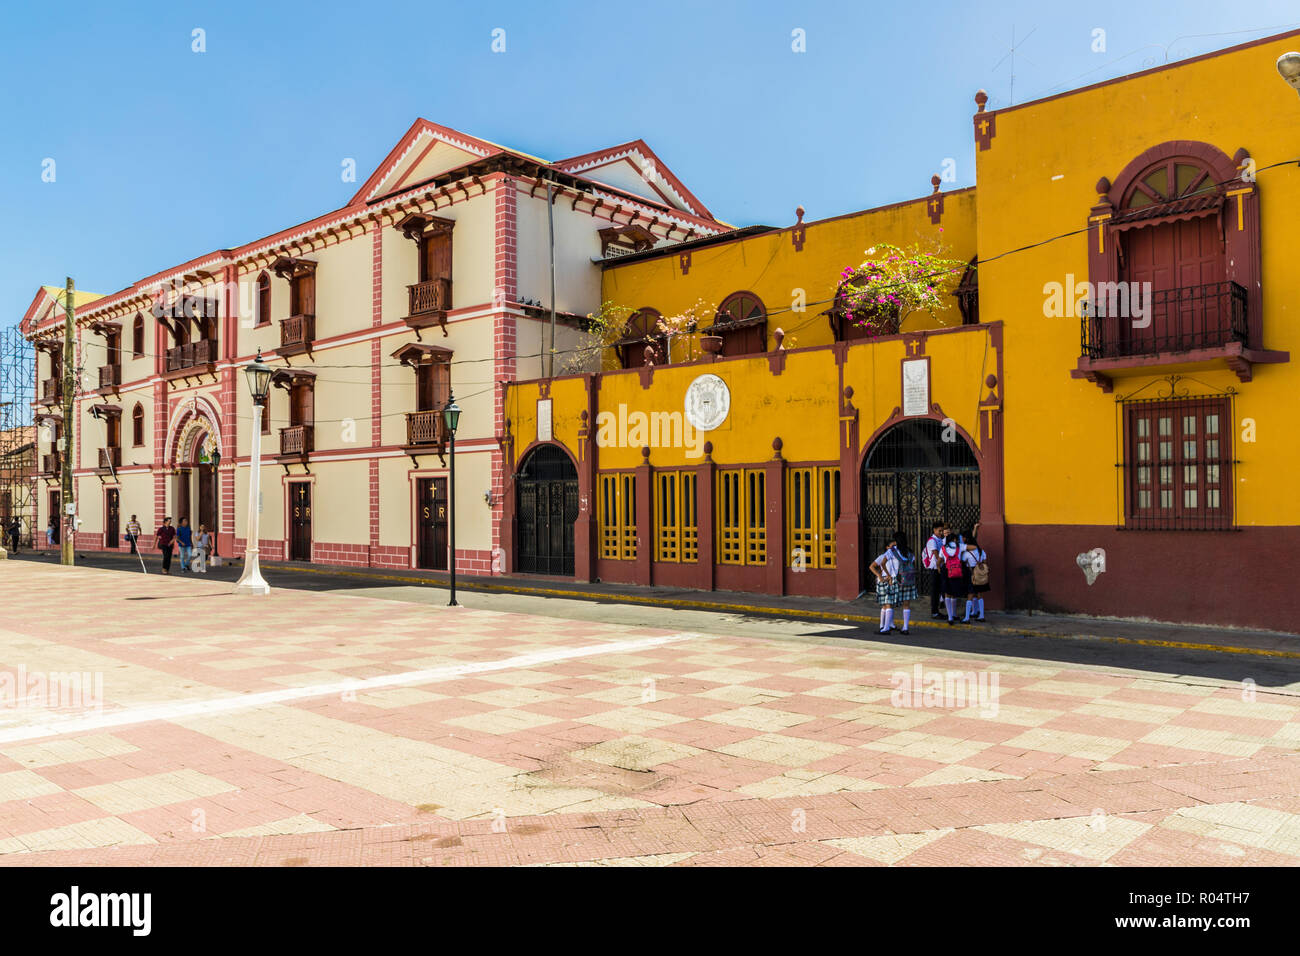 The colourful facade of the College of Ramon by Central Park, Leon, Nicaragua, Central America Stock Photo